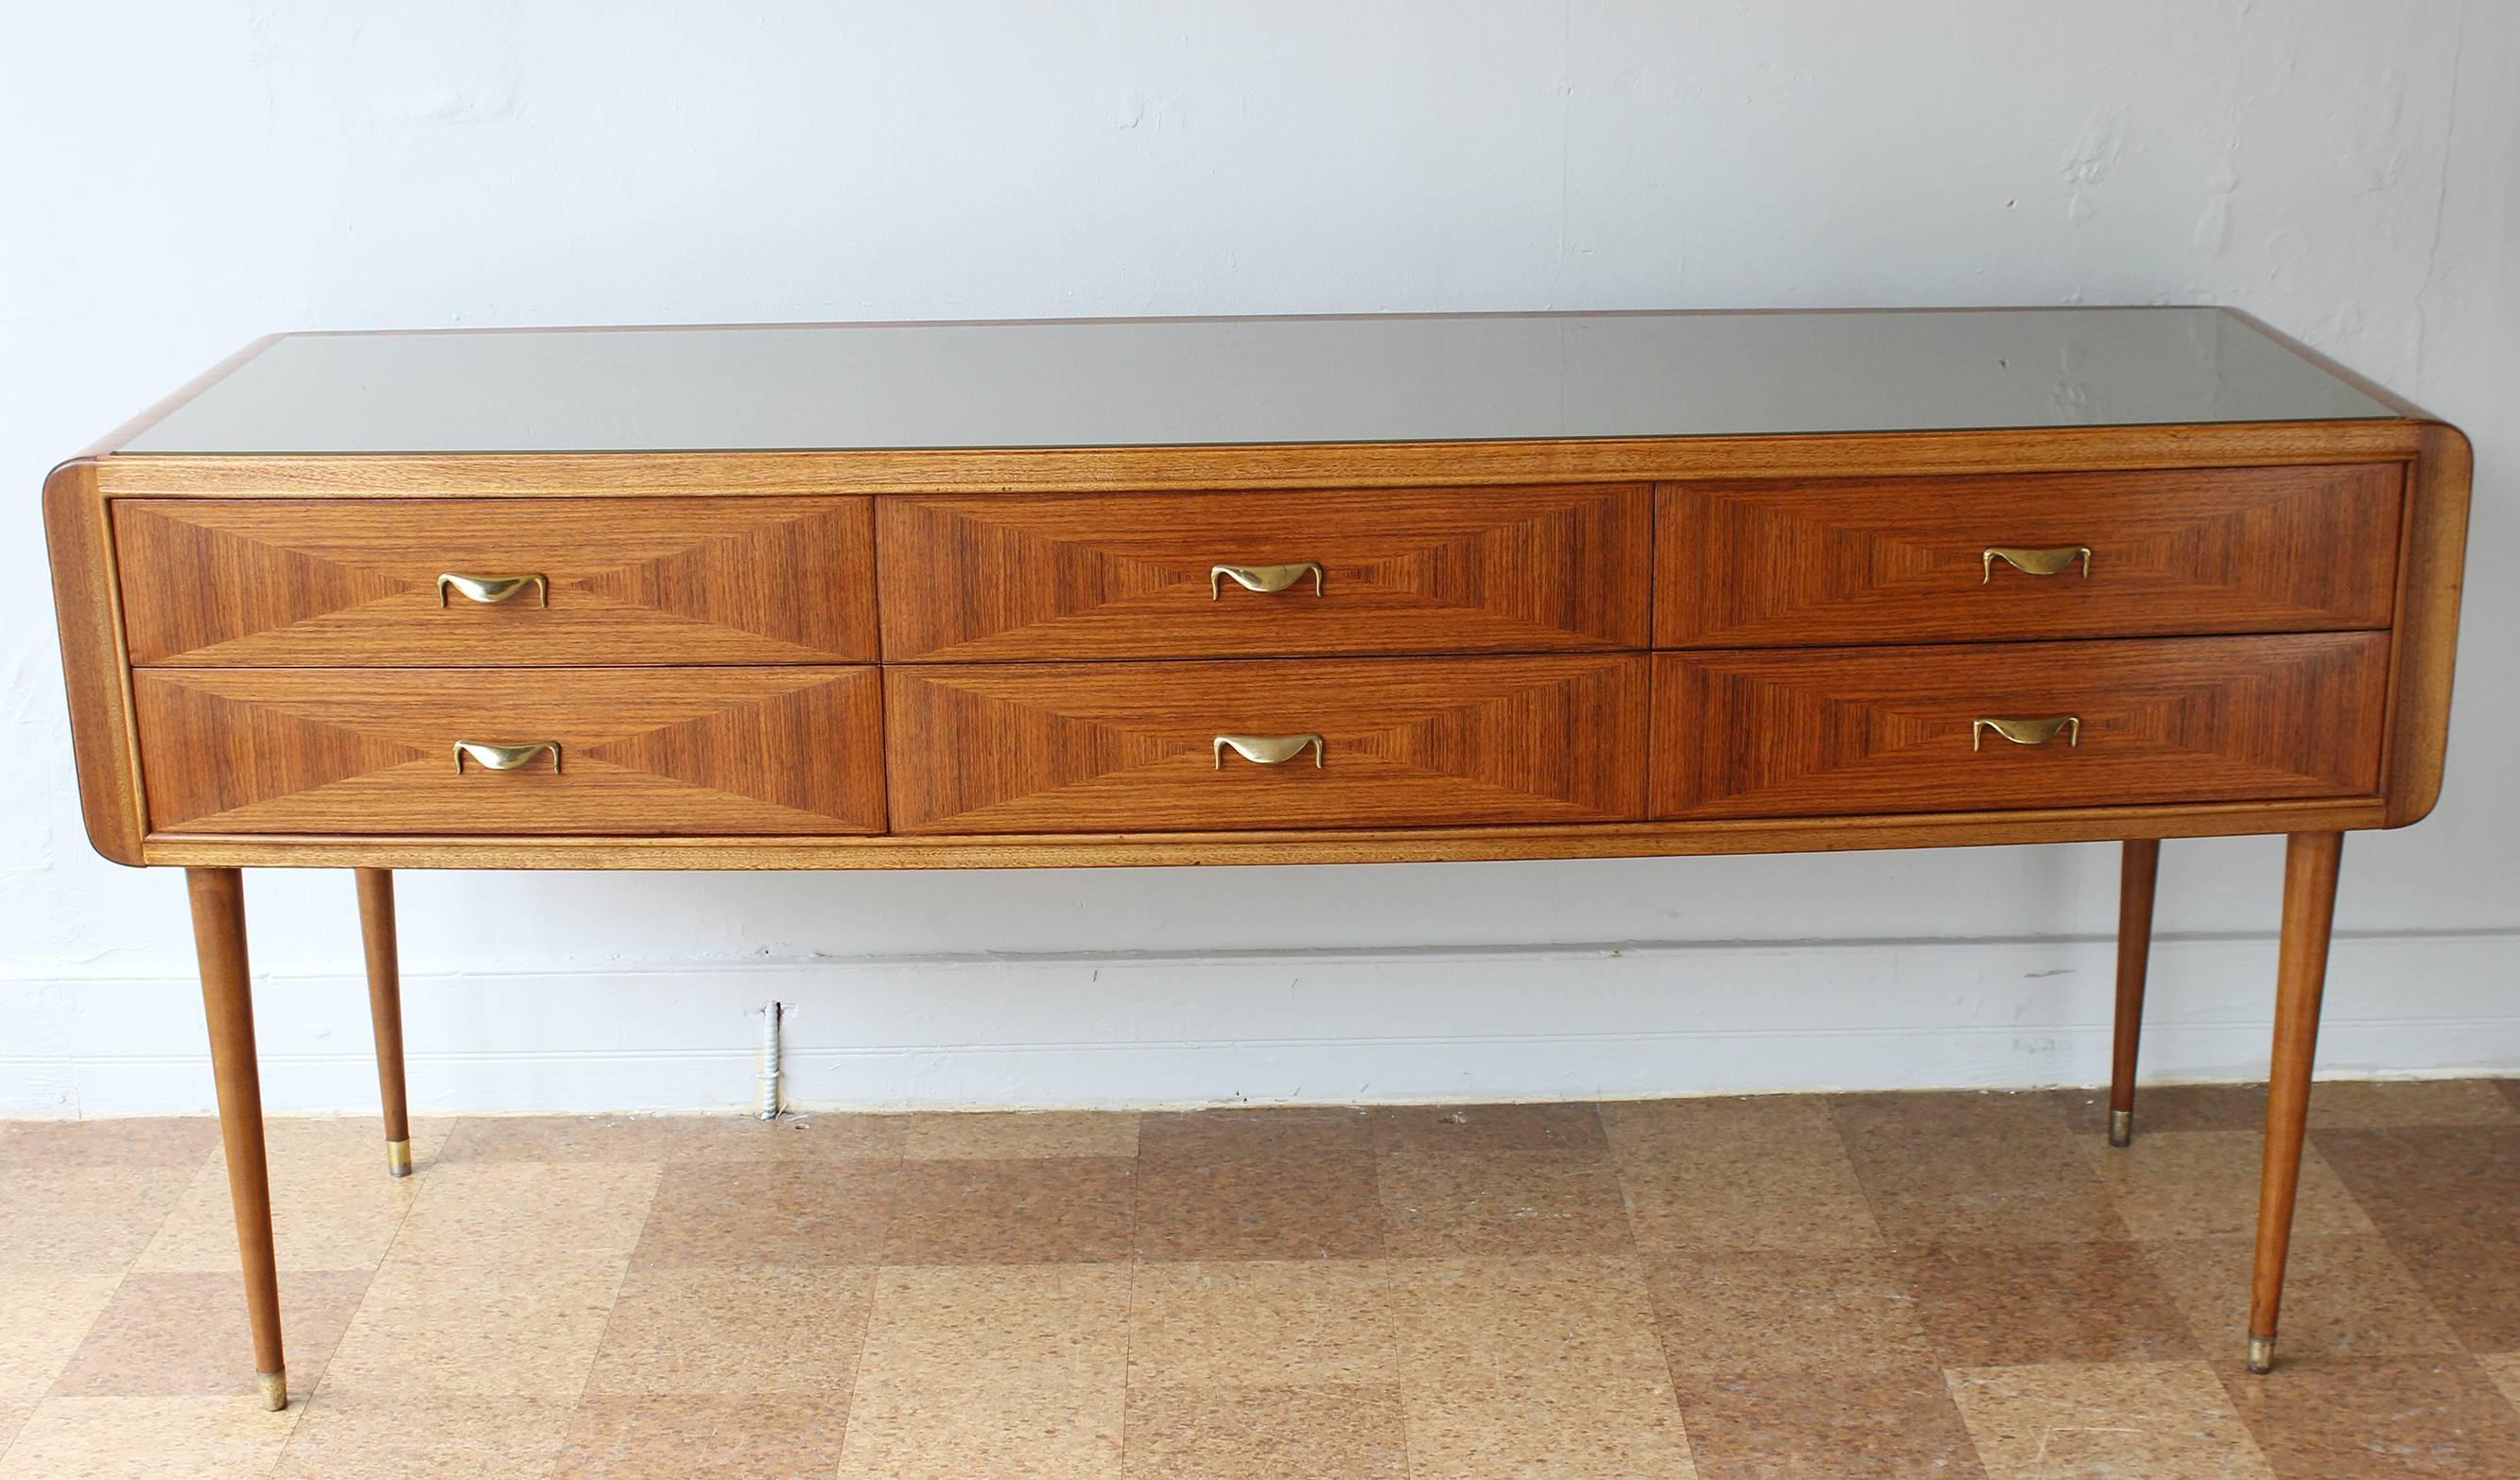 An Italian six-drawer sideboard with glass plateau, featuring a gently curved front, in the manner of Paolo Buffa. Drawers feature geometric rosewood marquetry inlay and brass hardware. Lightly restored.